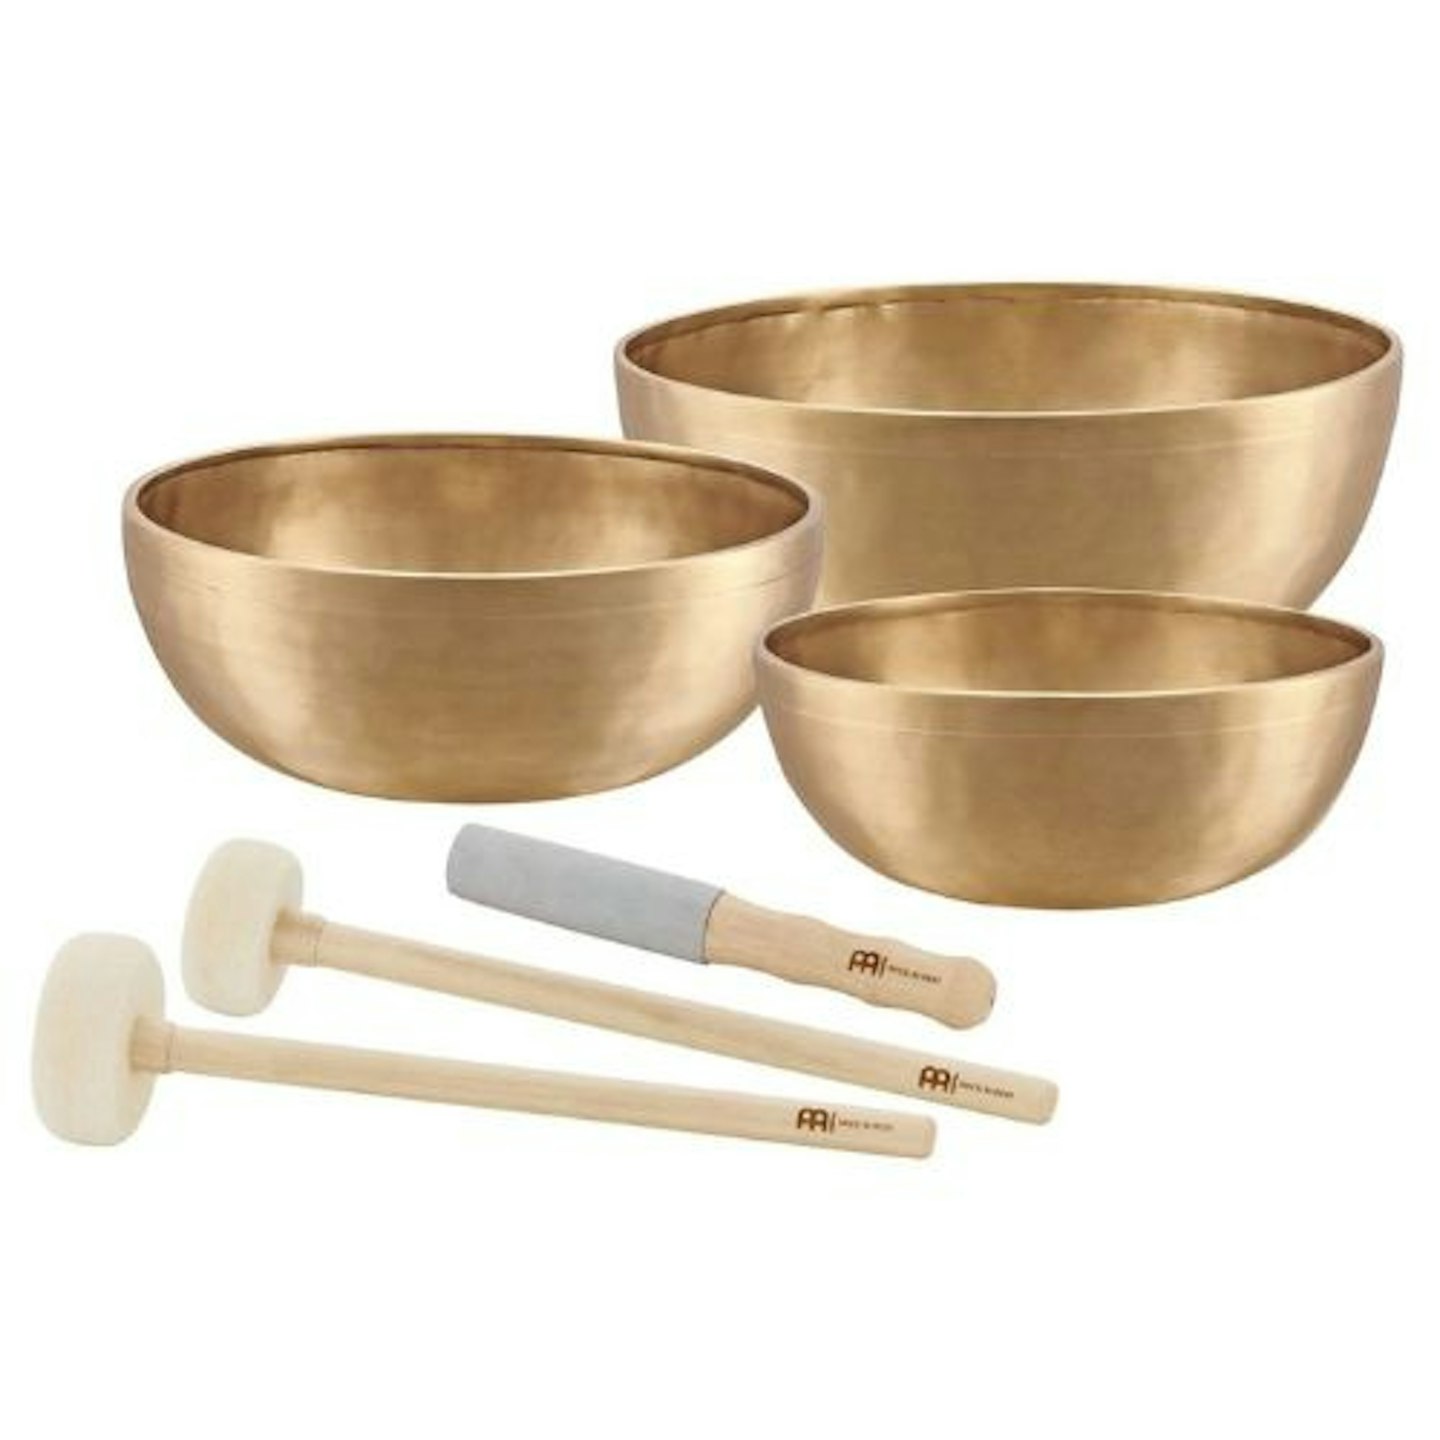 Meinl Therapy Singing Bowl Set (1000, 1400, 2200)